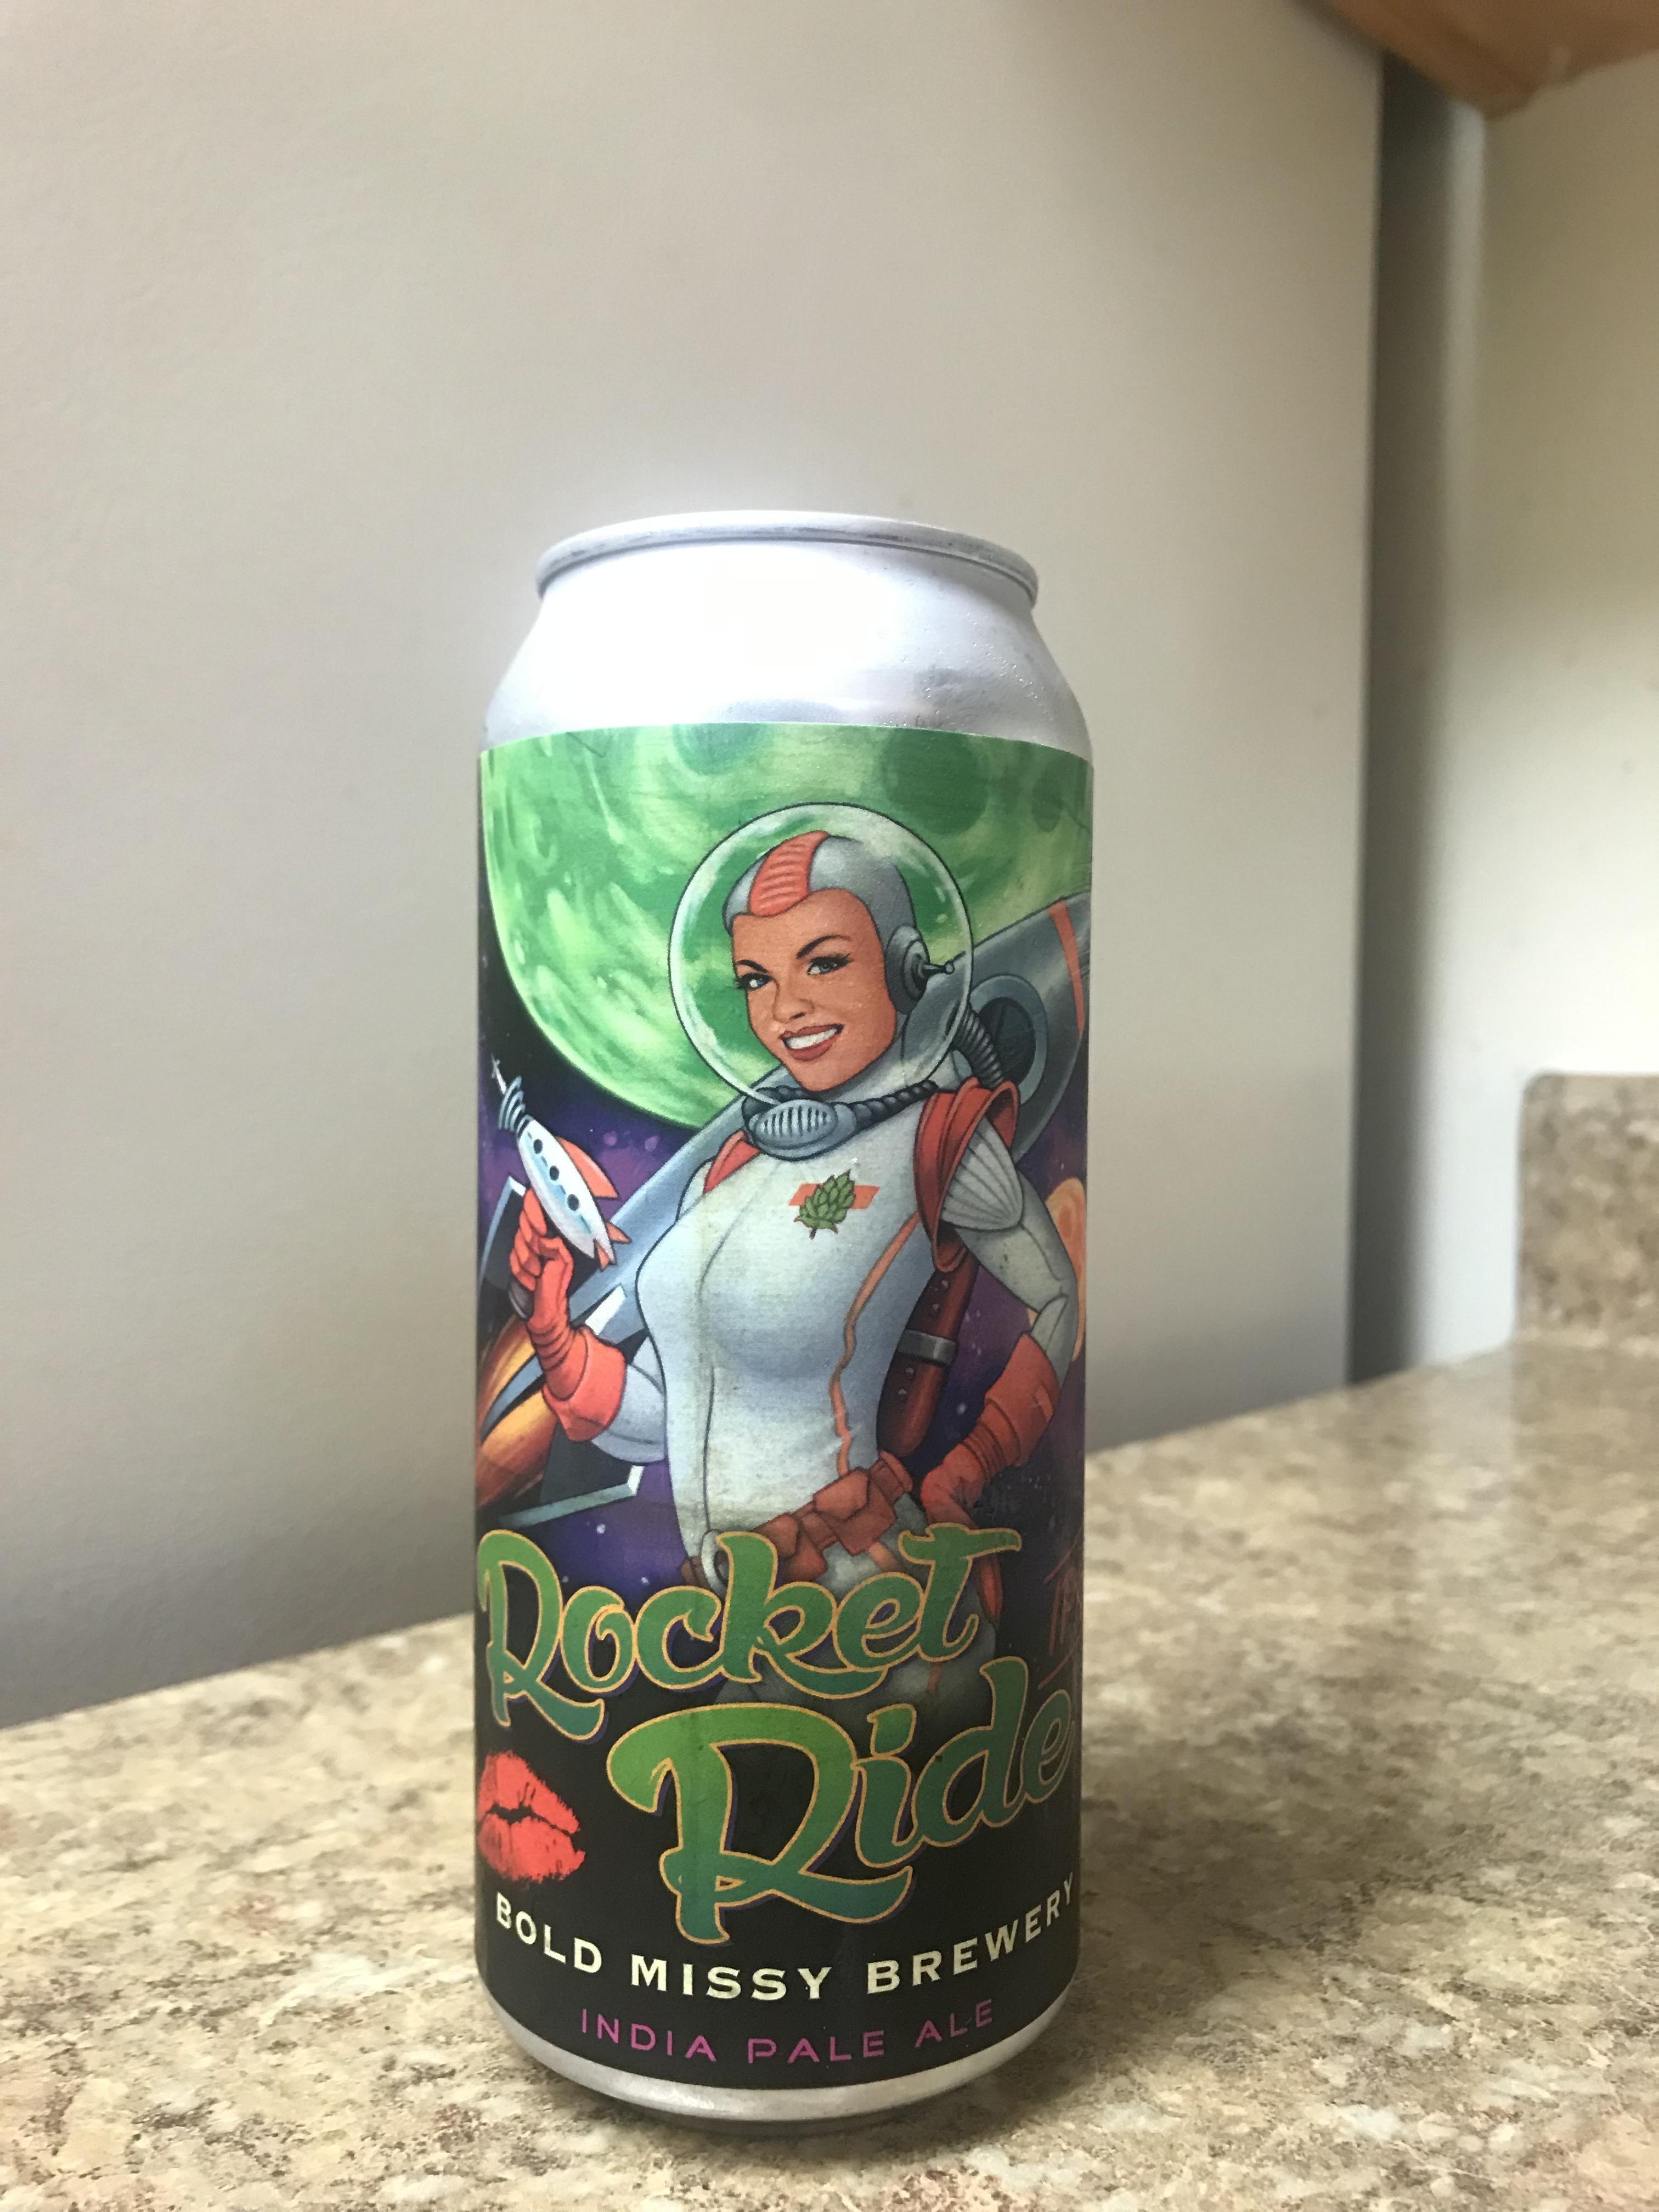 This beer from the brewery my friend works at.jpg